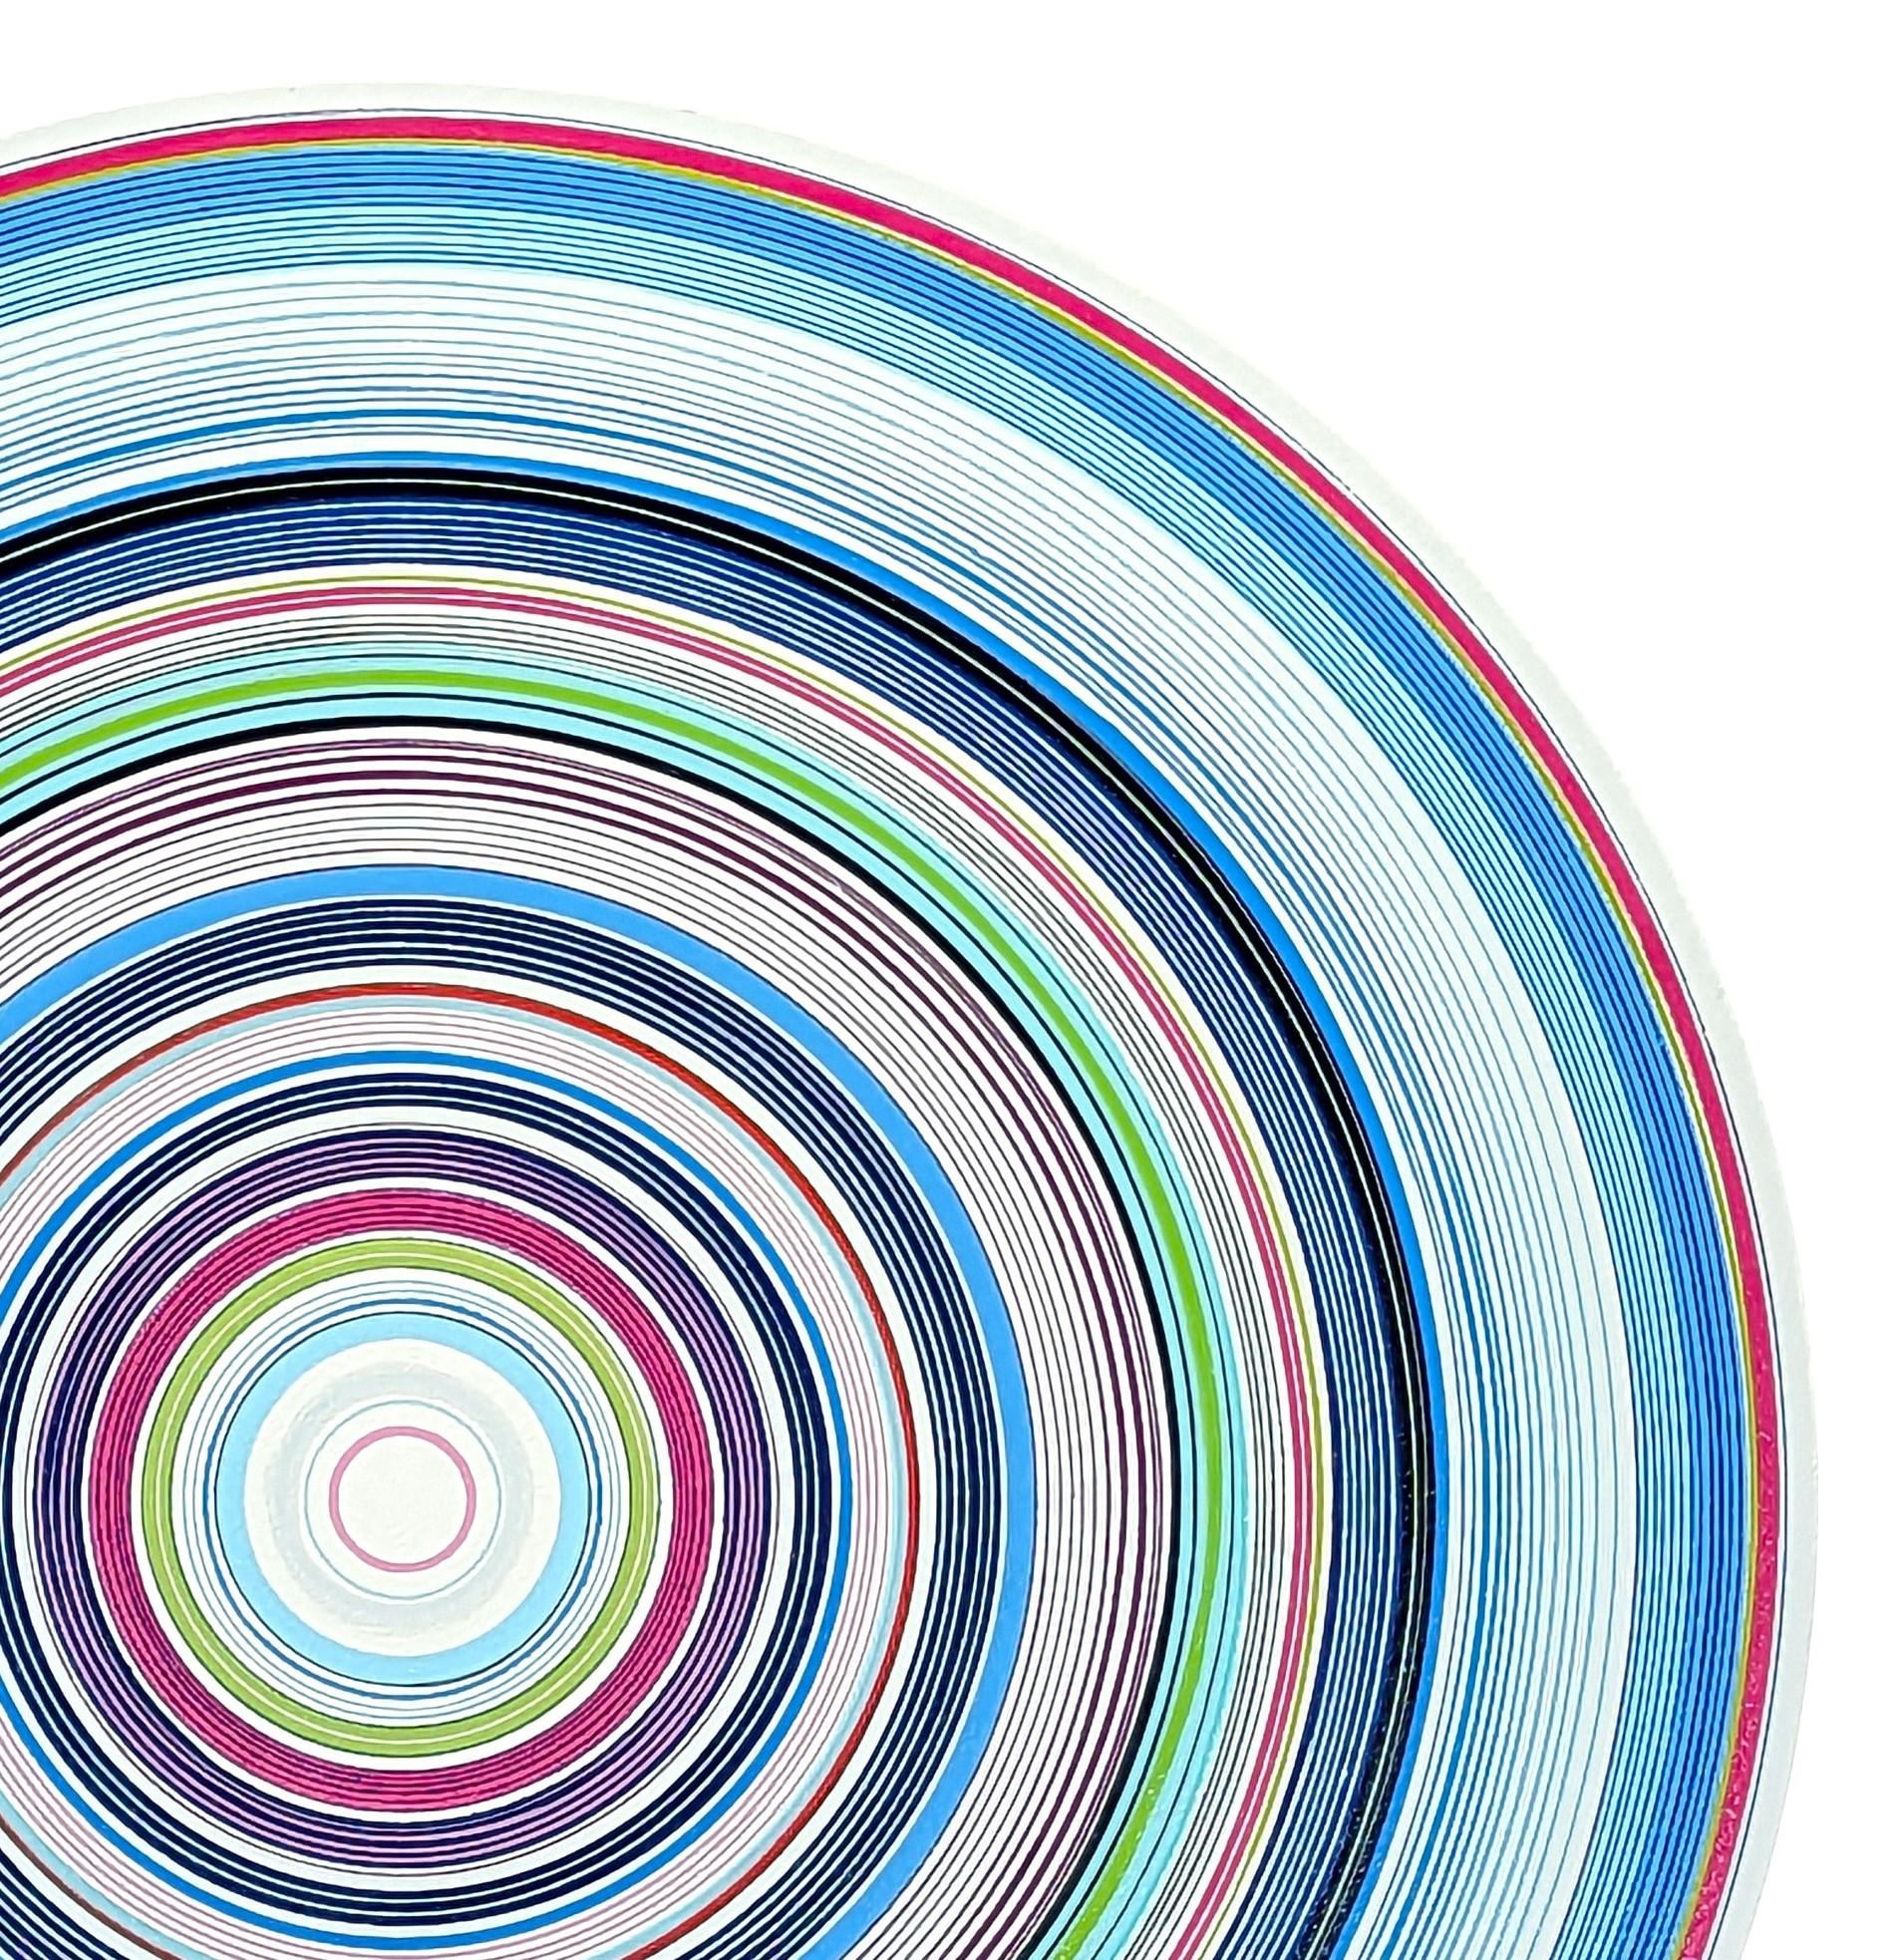 “Dreaming of You” Contemporary Blue, Green, and Pink Concentric Circle Painting 1